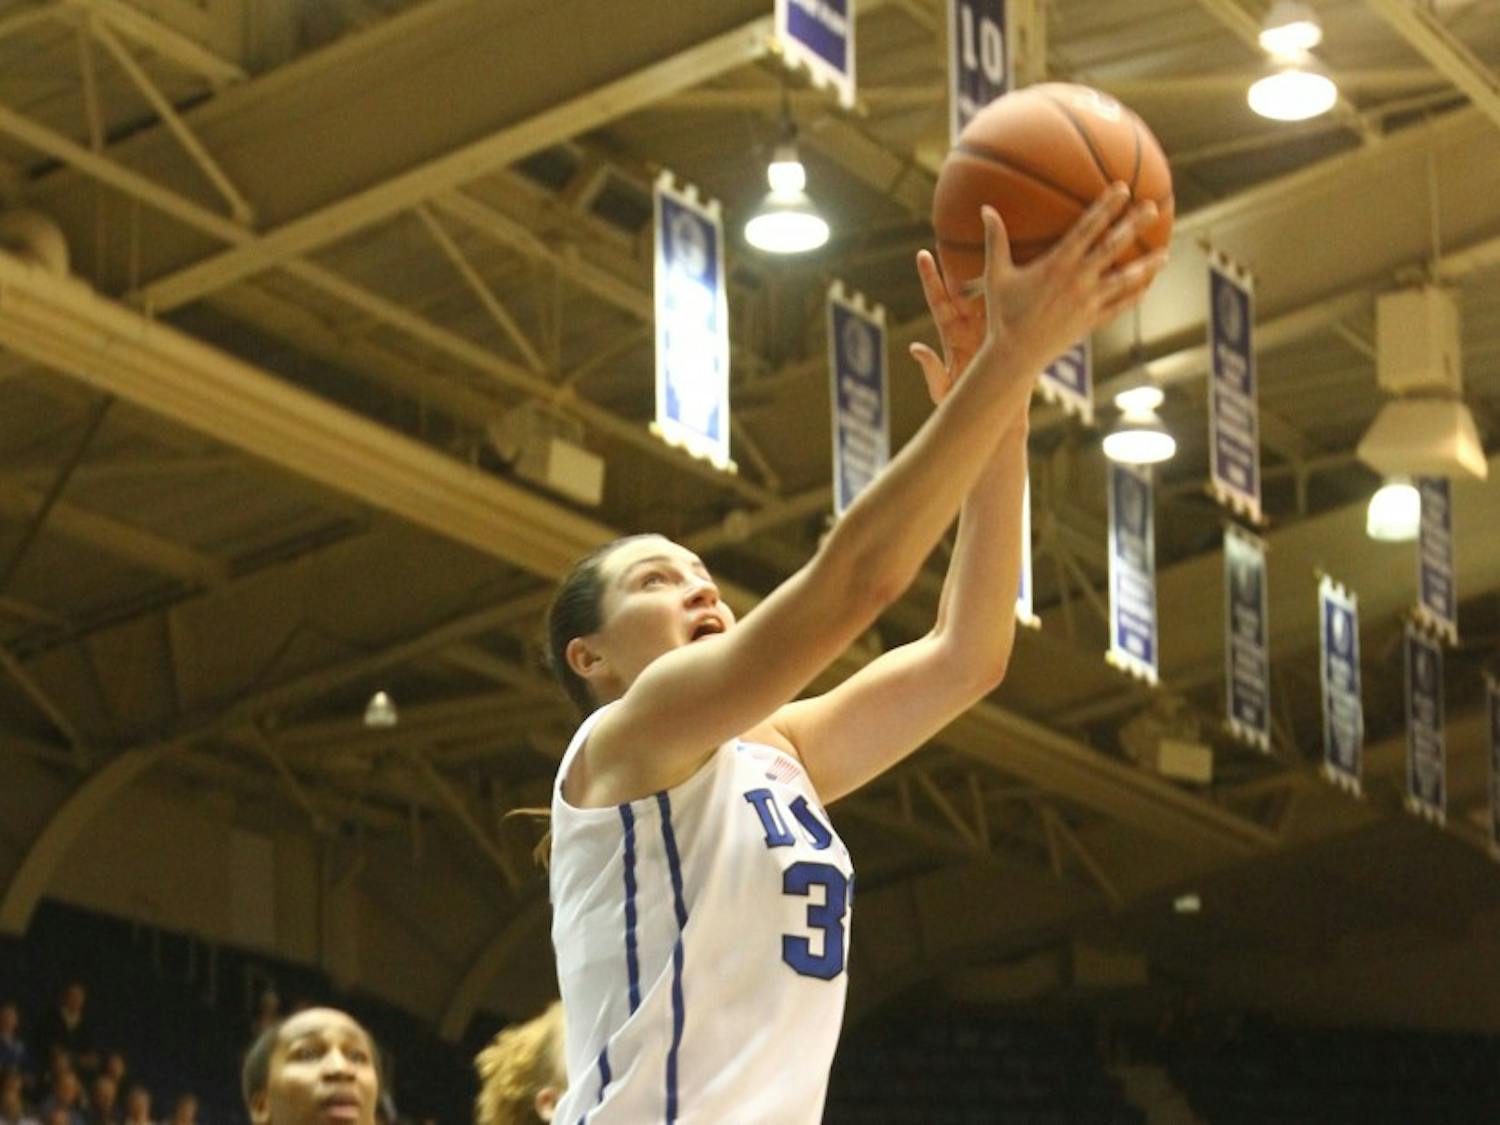 Haley Peters' return to the court sparked a run that sealed Duke's victory against Vanderbilt.